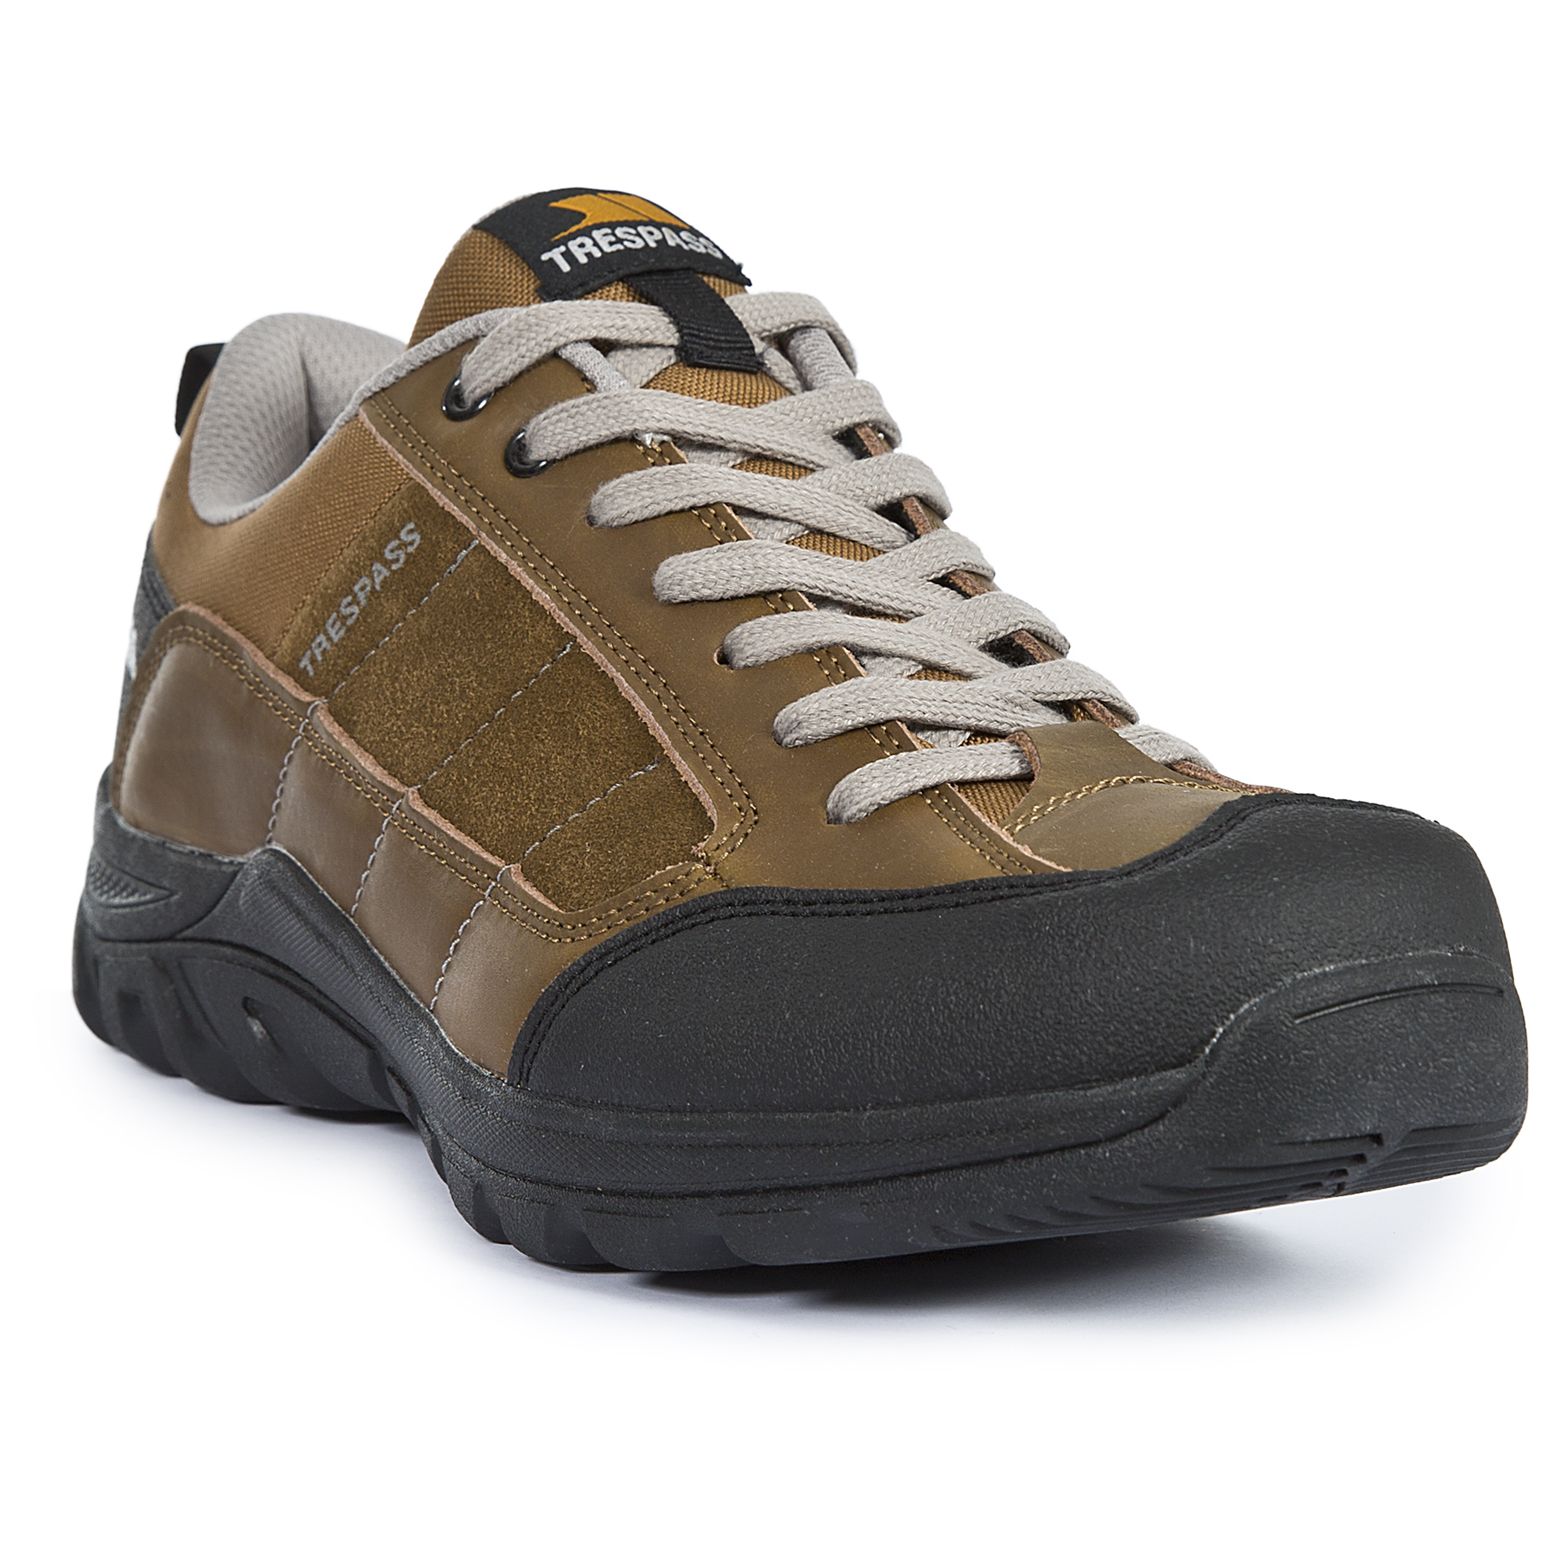 Mearns Mens Walking Trainers